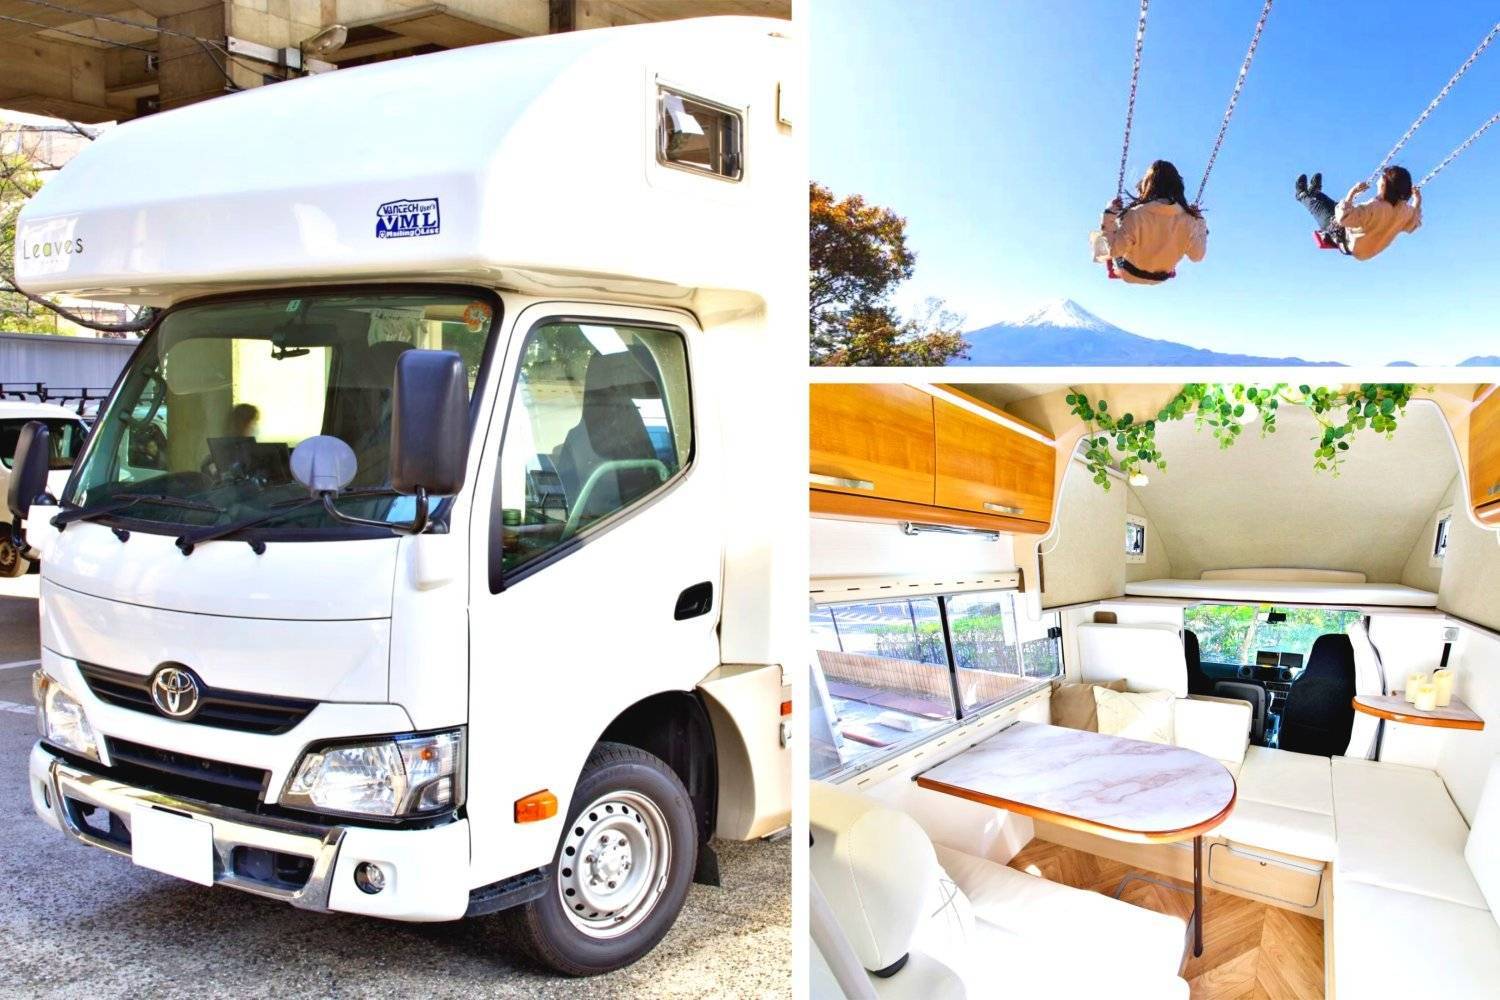 Young's Holidays 【Tokyo】Japan 6ppl RV Caravan 24 hours Rental Experience(JTMS2) 1